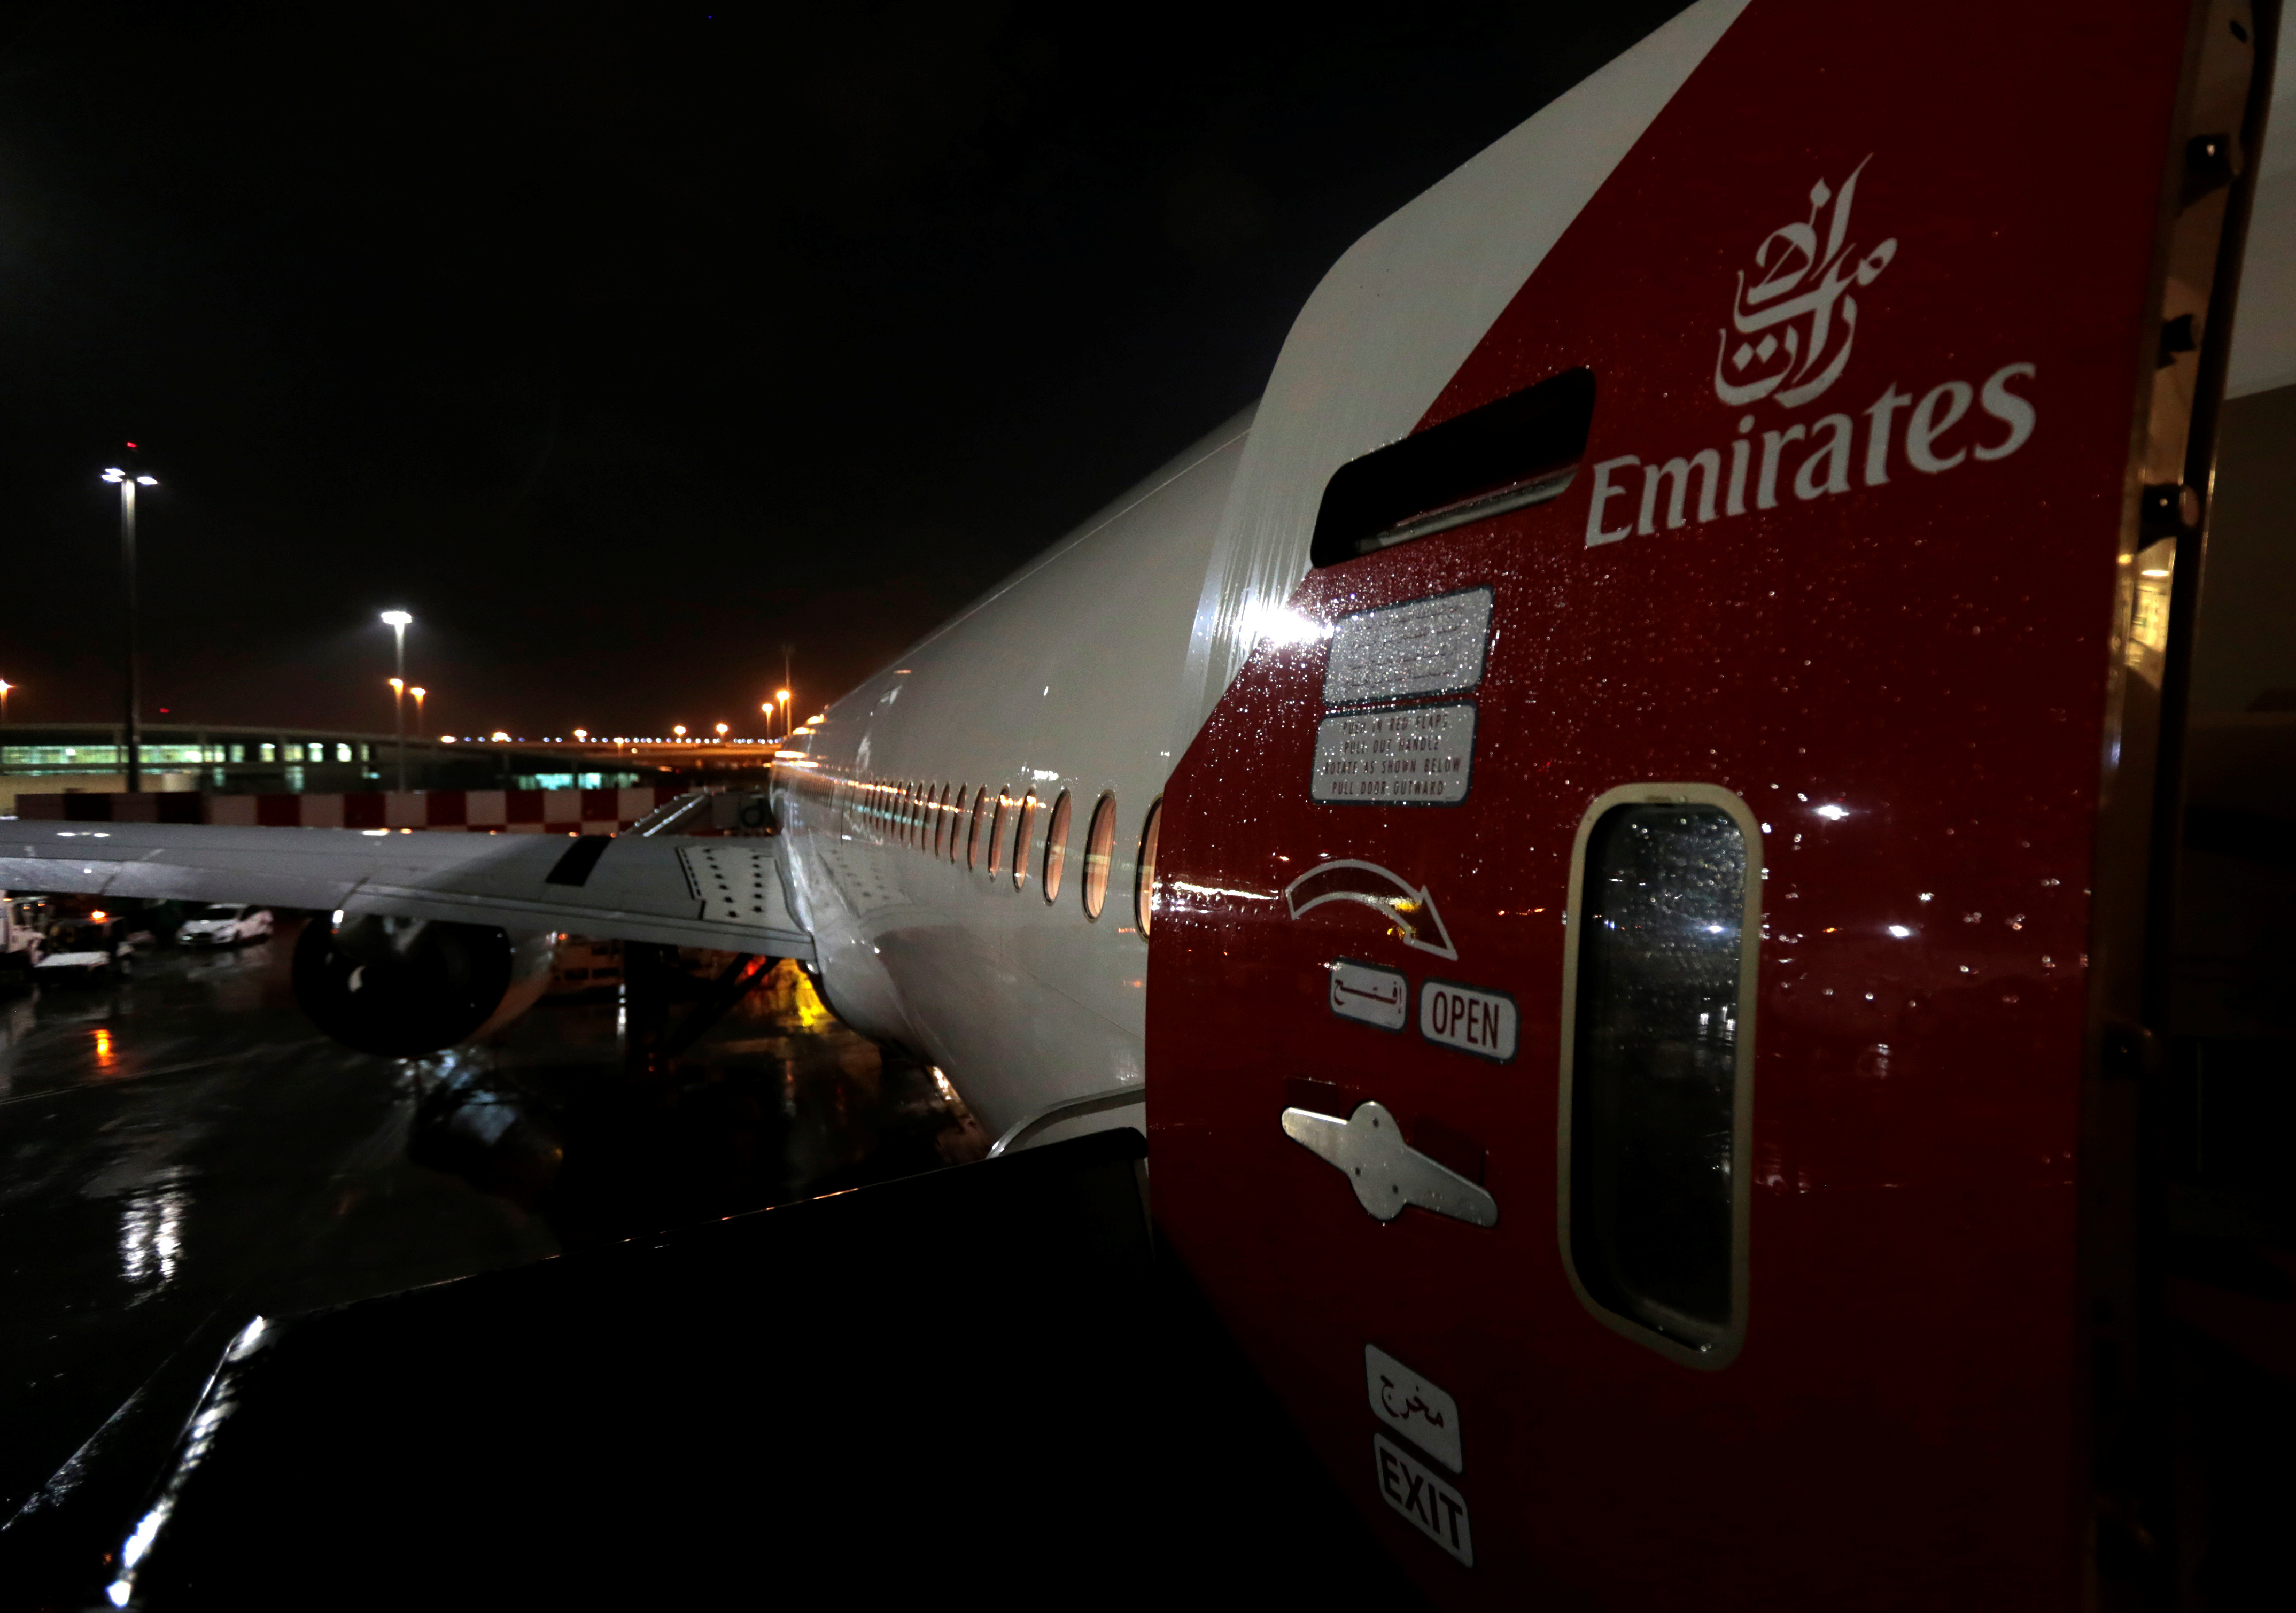 The Emirates airlines logo is seen on the back door of a plane at Dubai International Airport